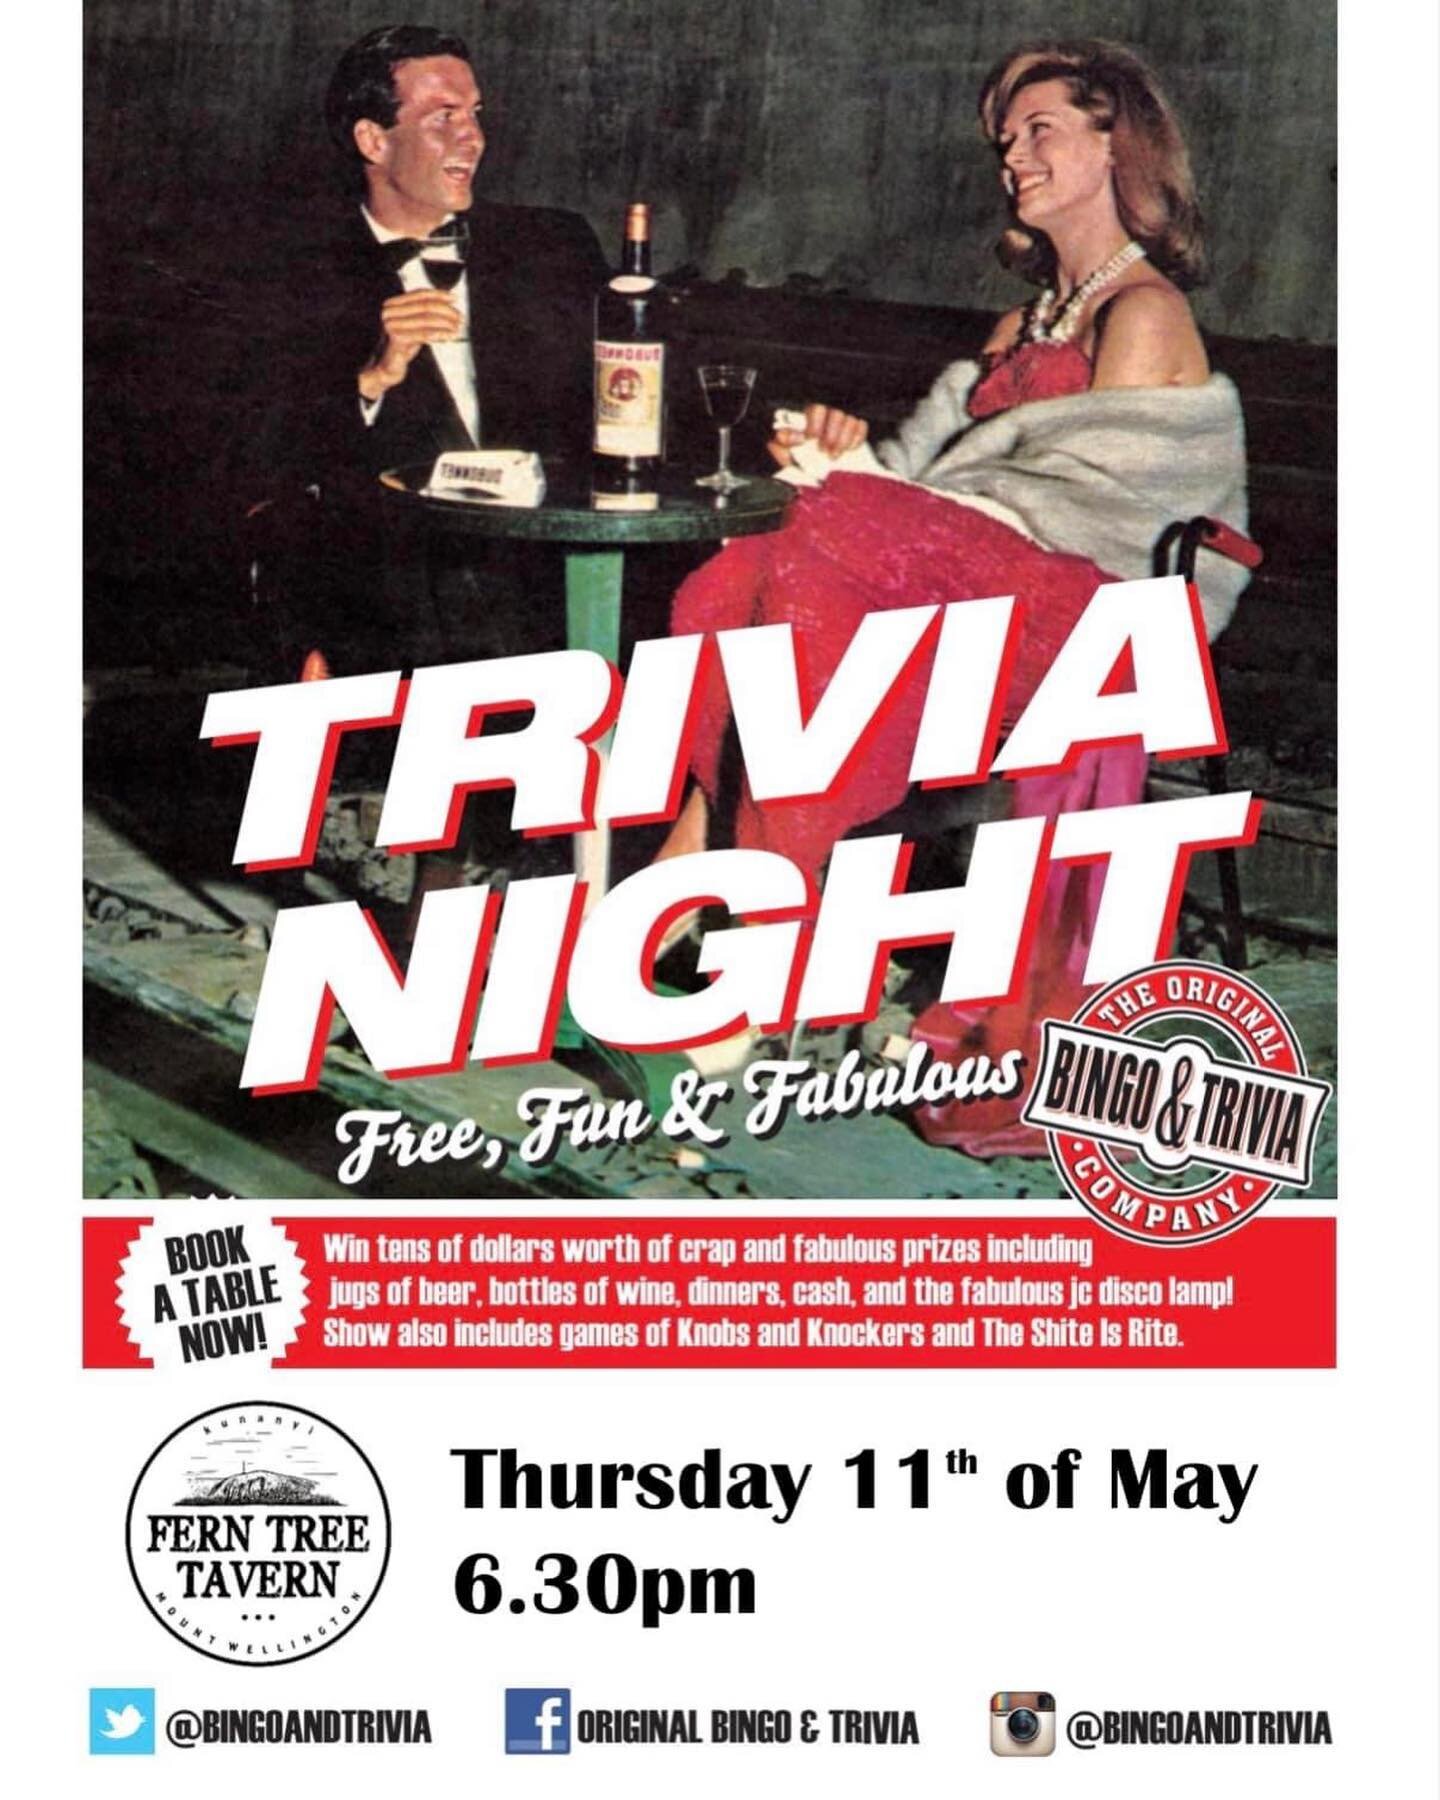 Tonight&rsquo;s the night we cross the ditch. 
First show starts tonight at @ferntreetavern Hobart 6.30pm. 
Then every 2nd Thursday monthly. 
.
Book your table now: (03) 6239 1171
.
#tasmania #crosstheditch #hobart #trivia #thursday #triviathursday #